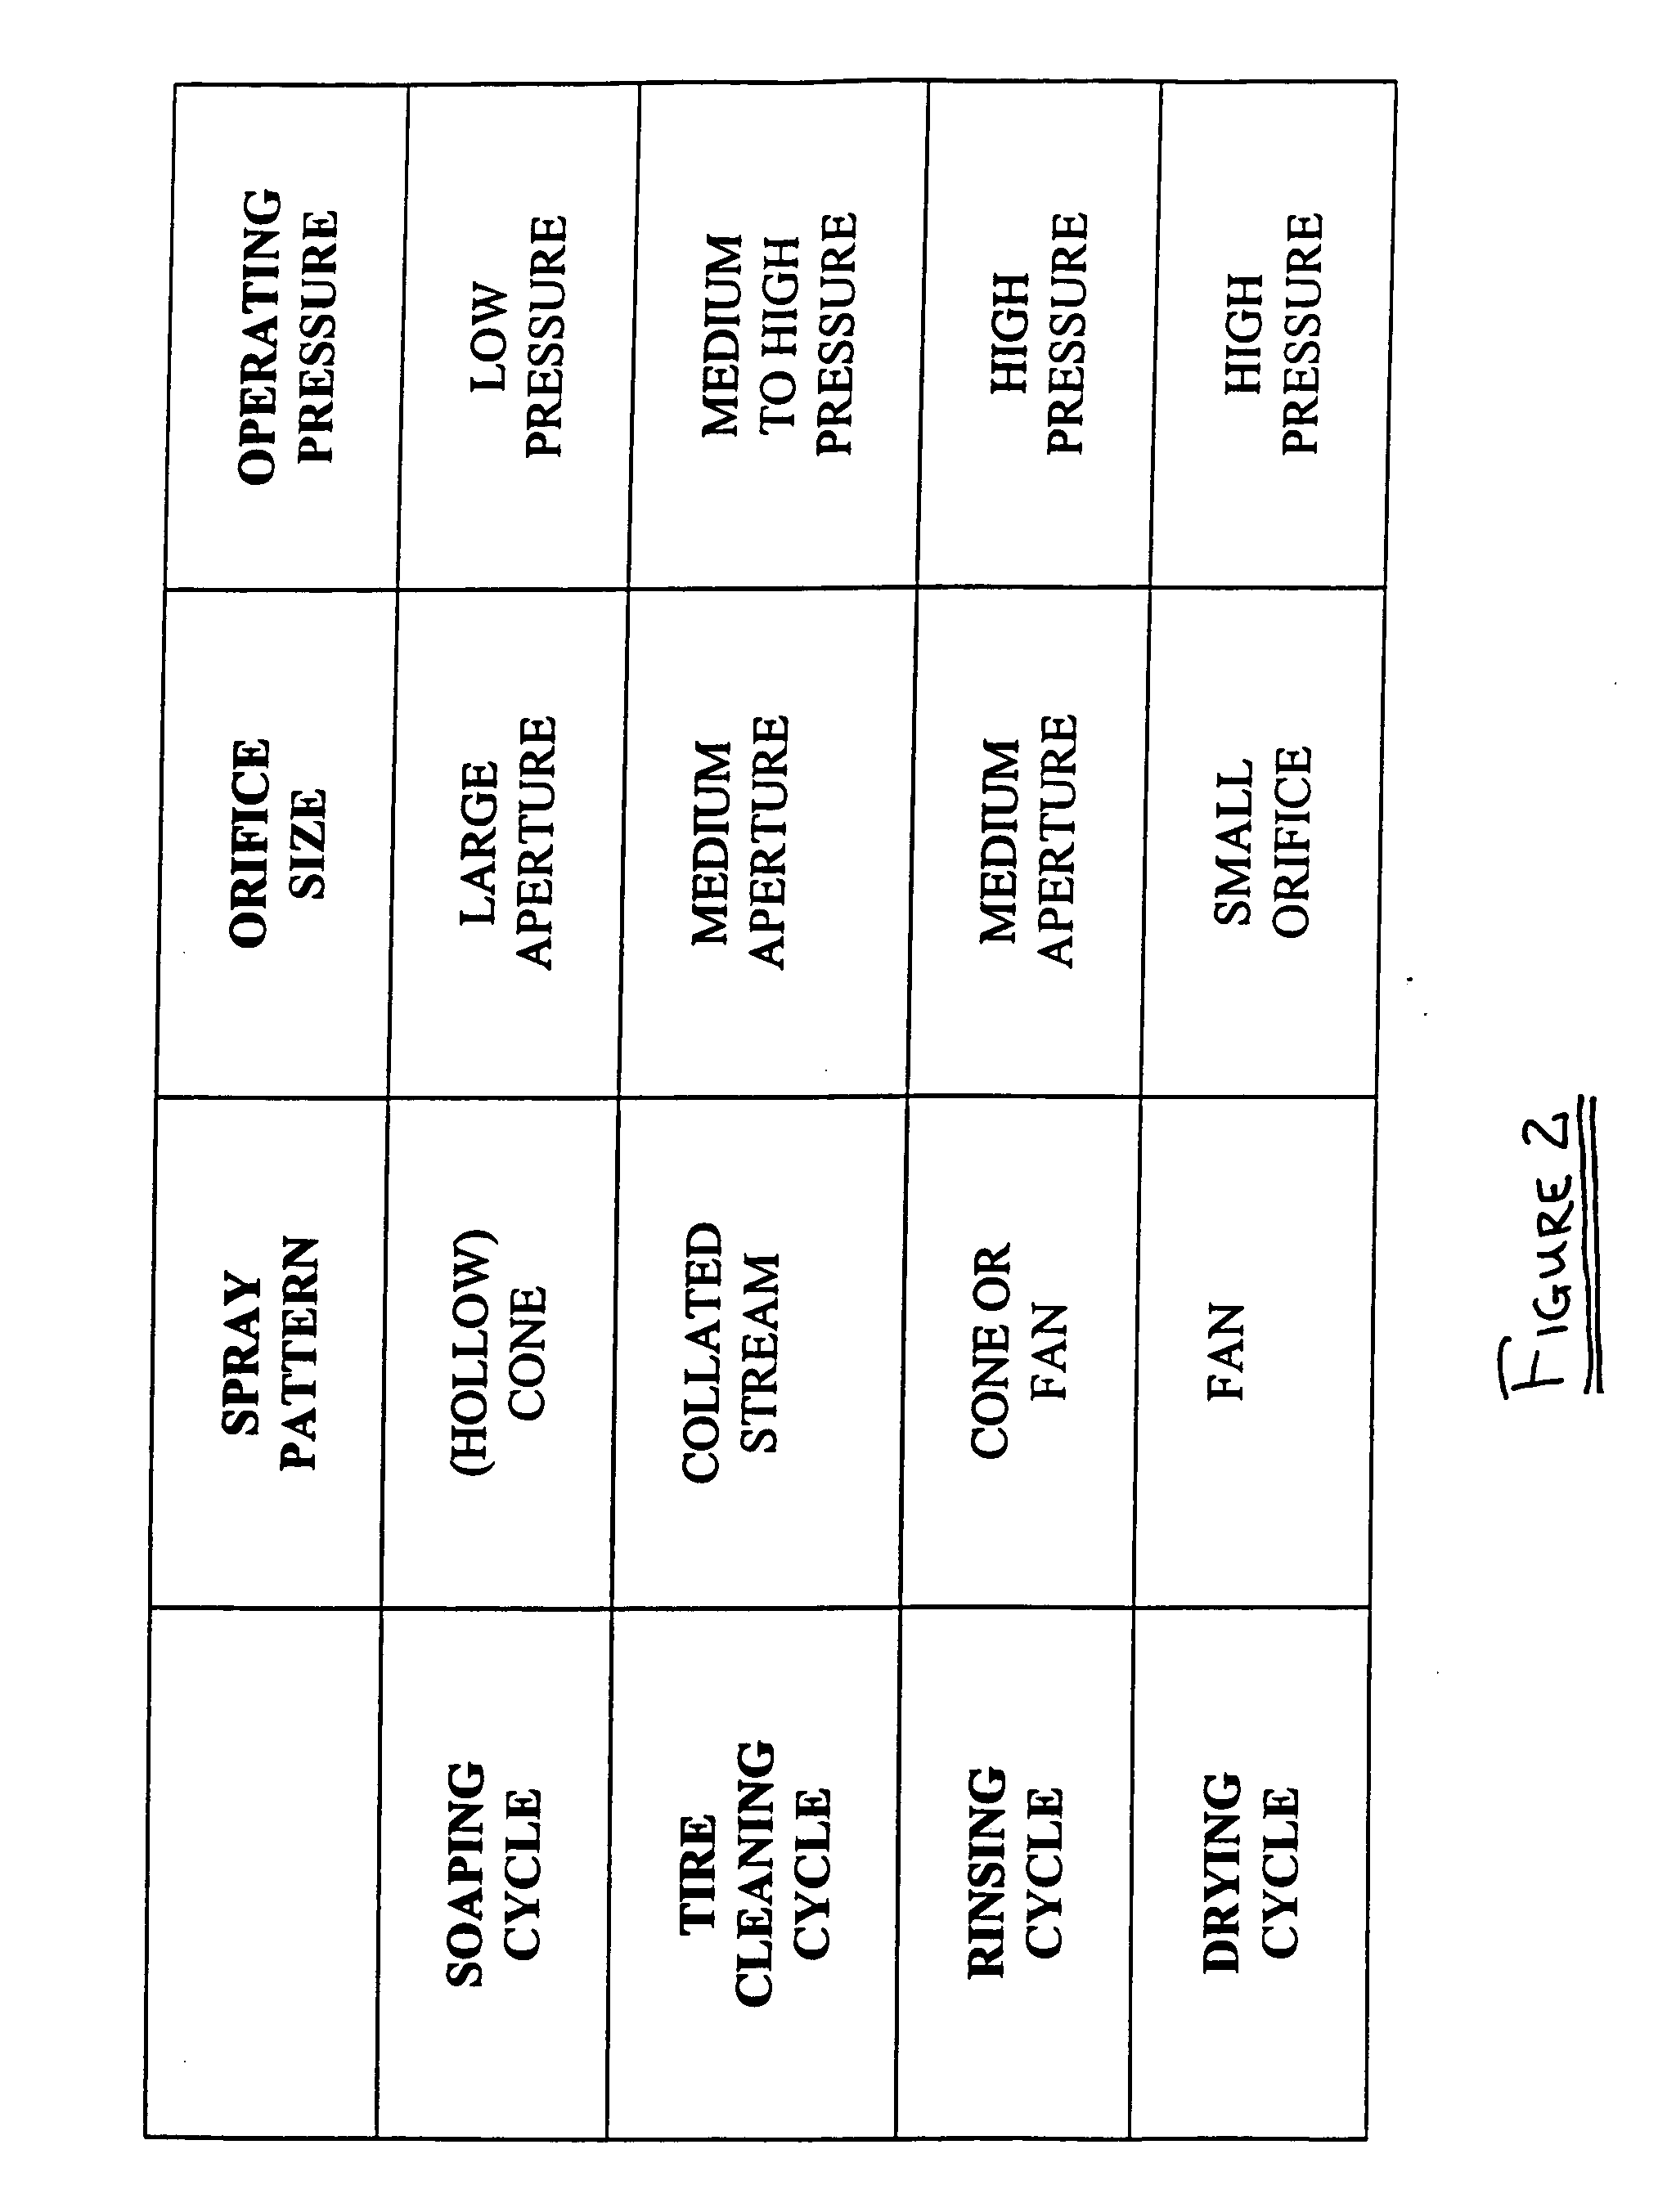 Method and apparatus for drying automobile at self-service carwash